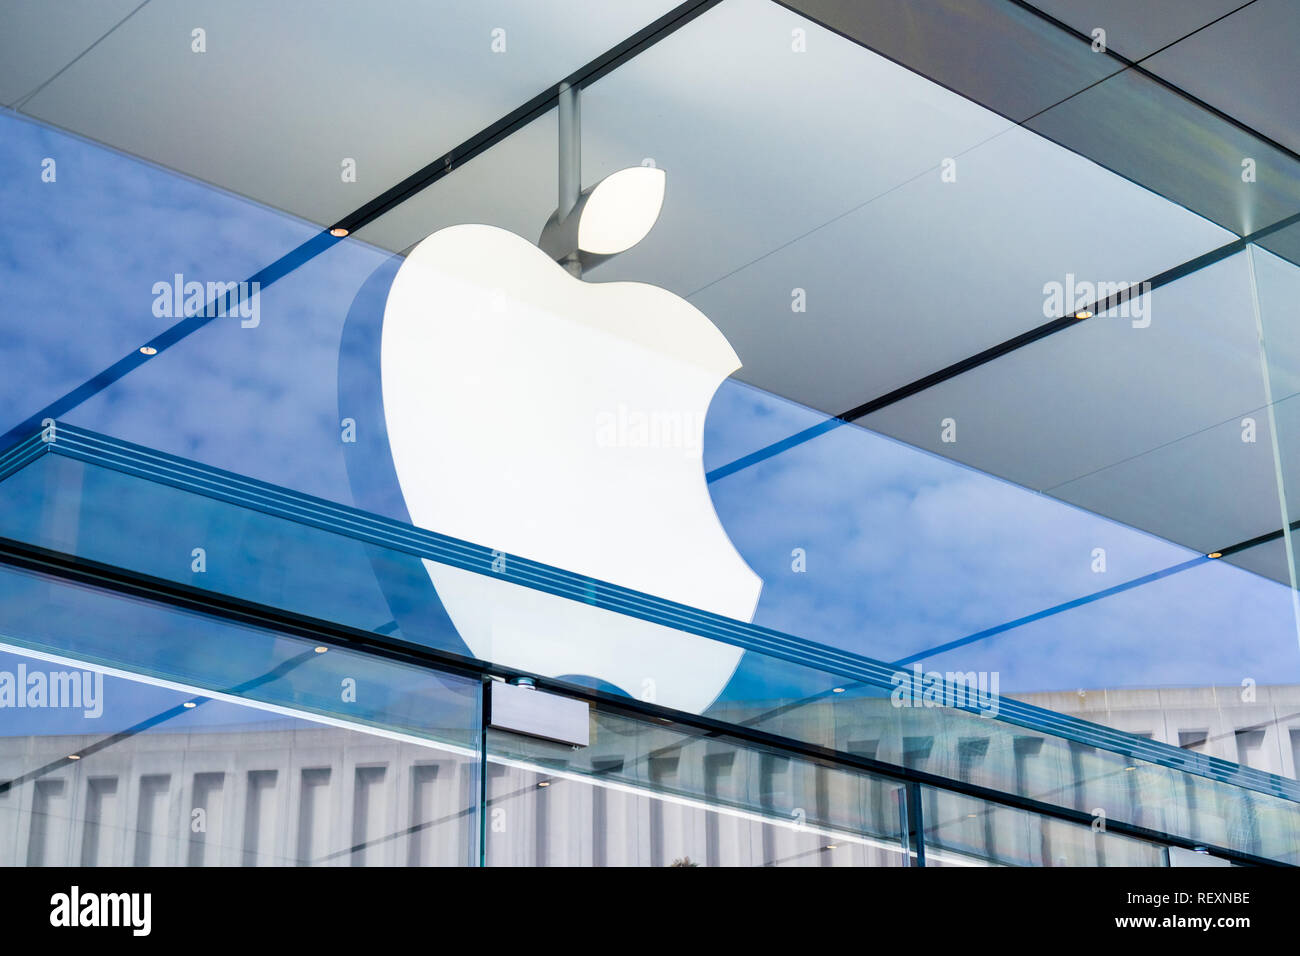 January 11, 2018 Palo Alto / CA / USA - Apple logo above the entrance to the store located in Stanford shopping center Stock Photo